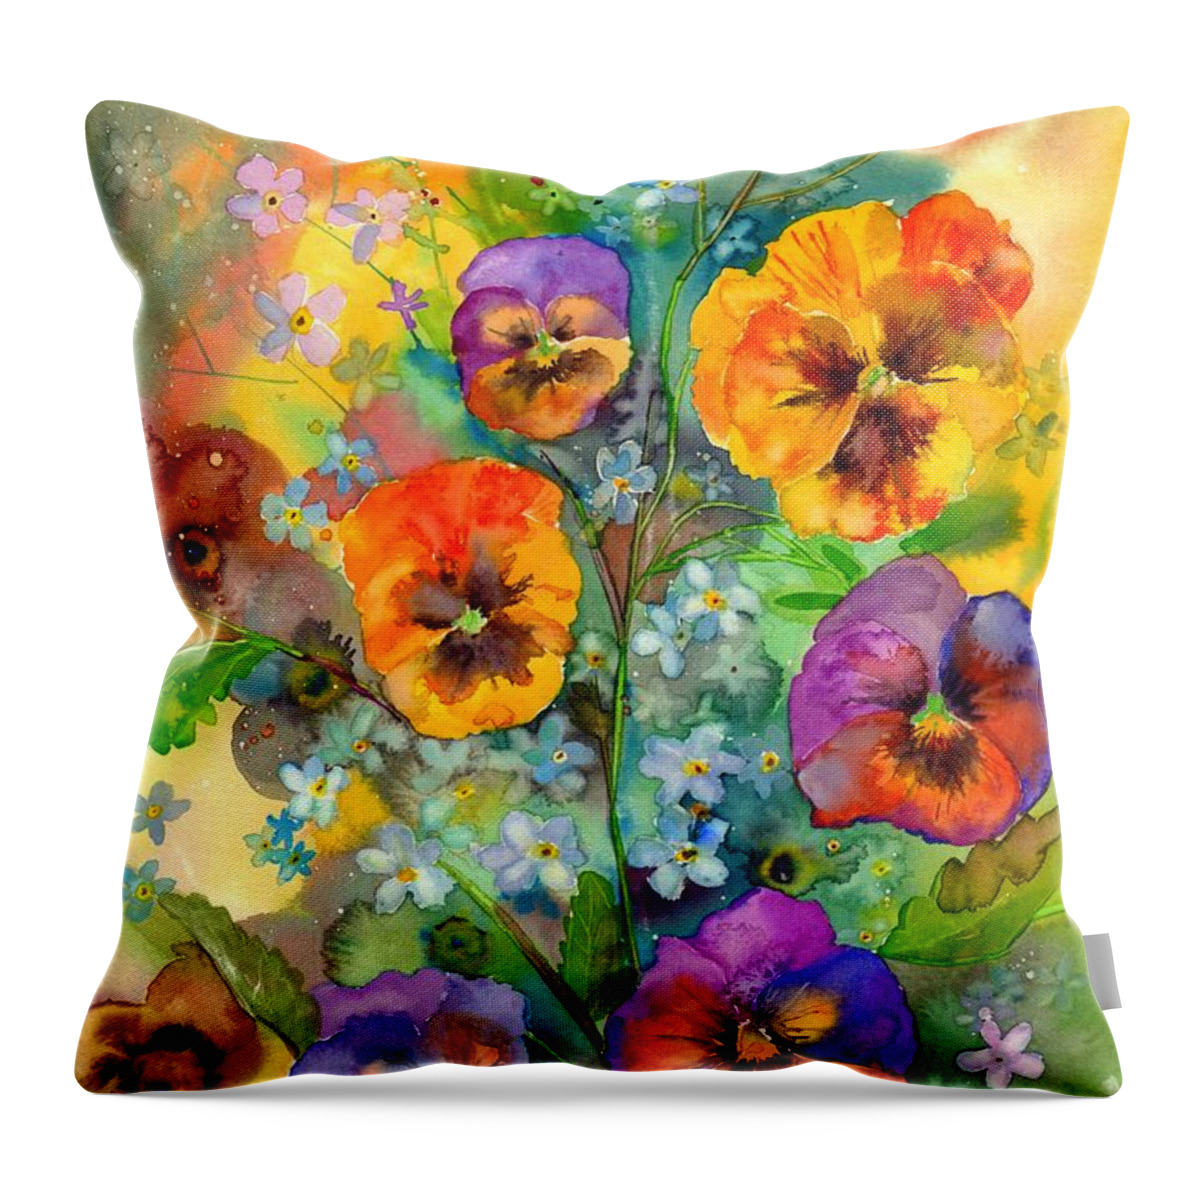 Pansies Throw Pillow featuring the painting Joyous Pansies by Suzann Sines